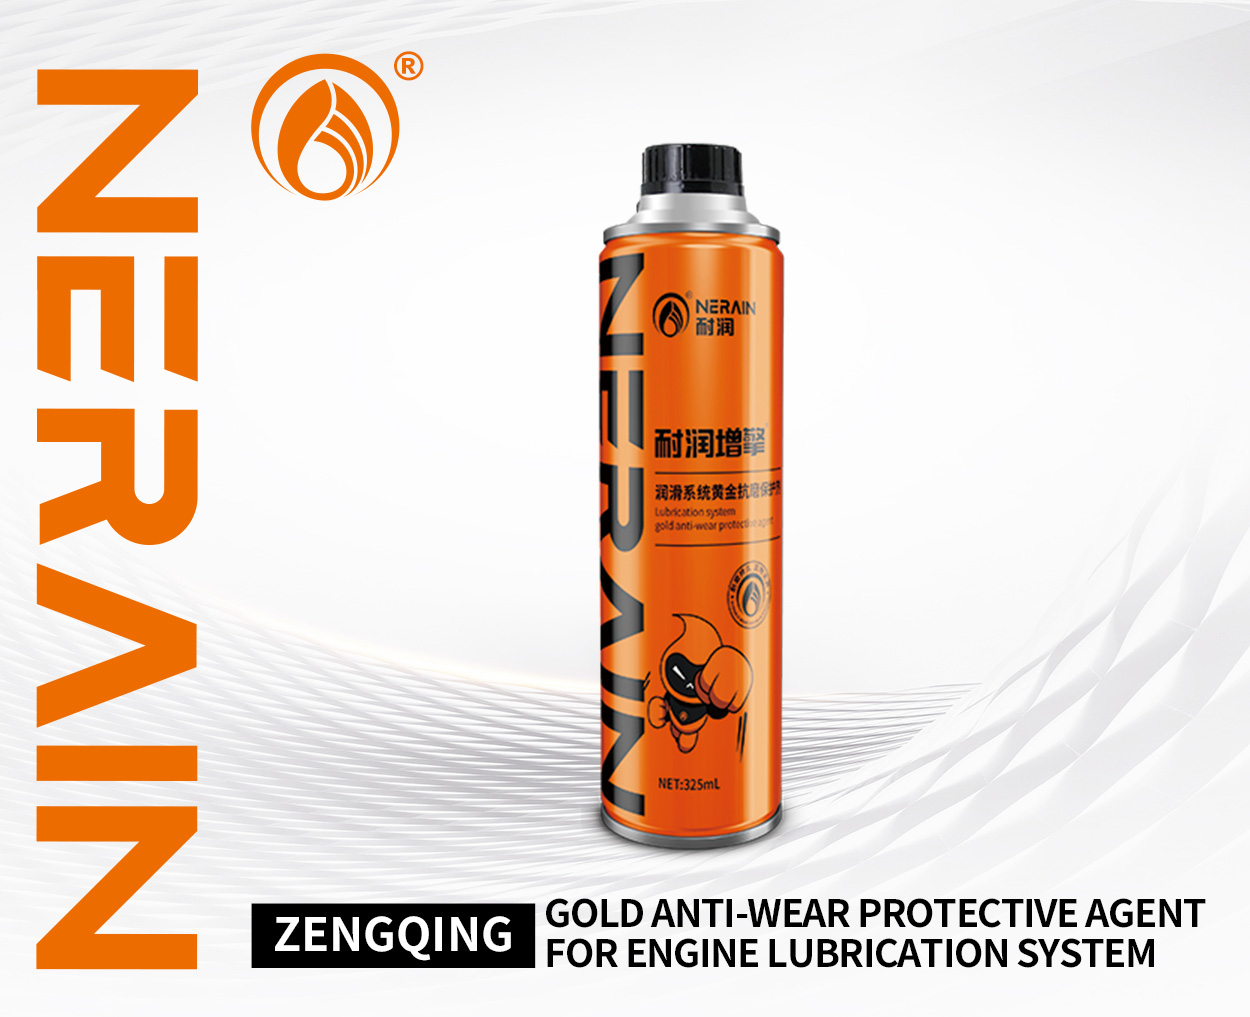 Gold Anti-wear Protective Agent for Engine Lubrication System